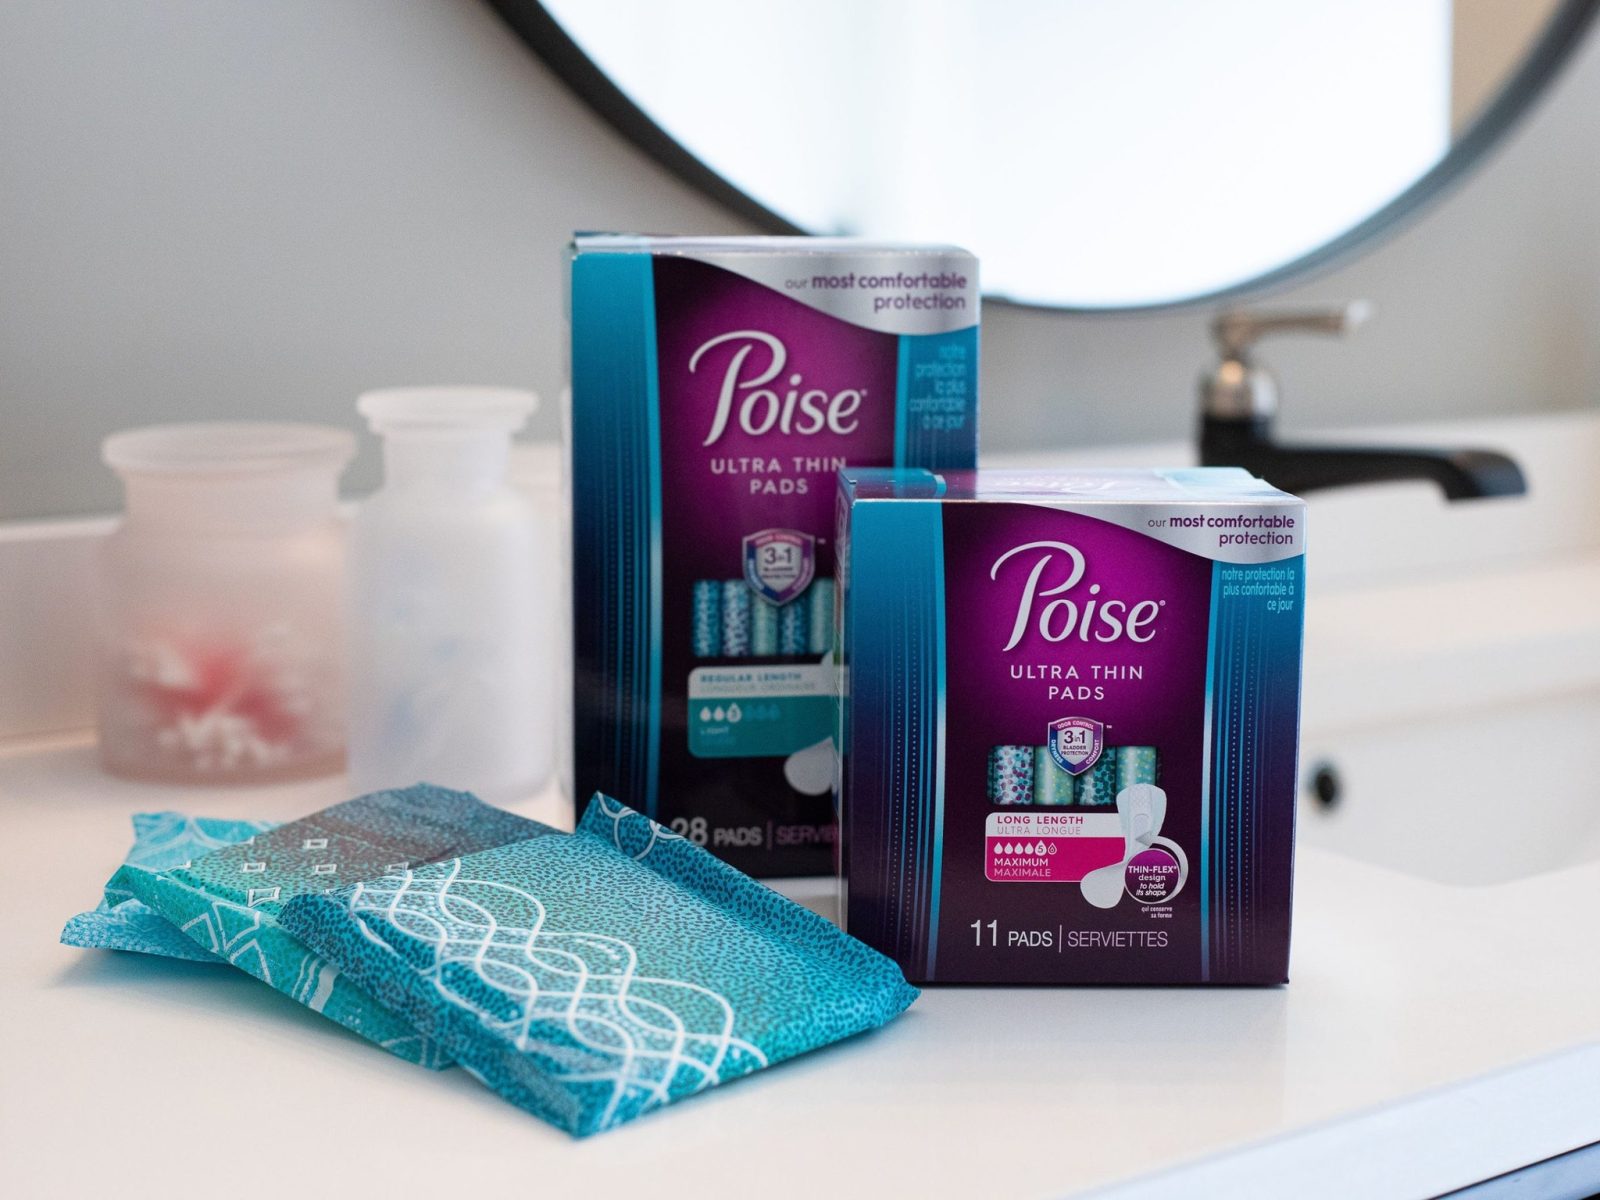 Poise Ultra Thin Pads As Low As 49¢ At Kroger